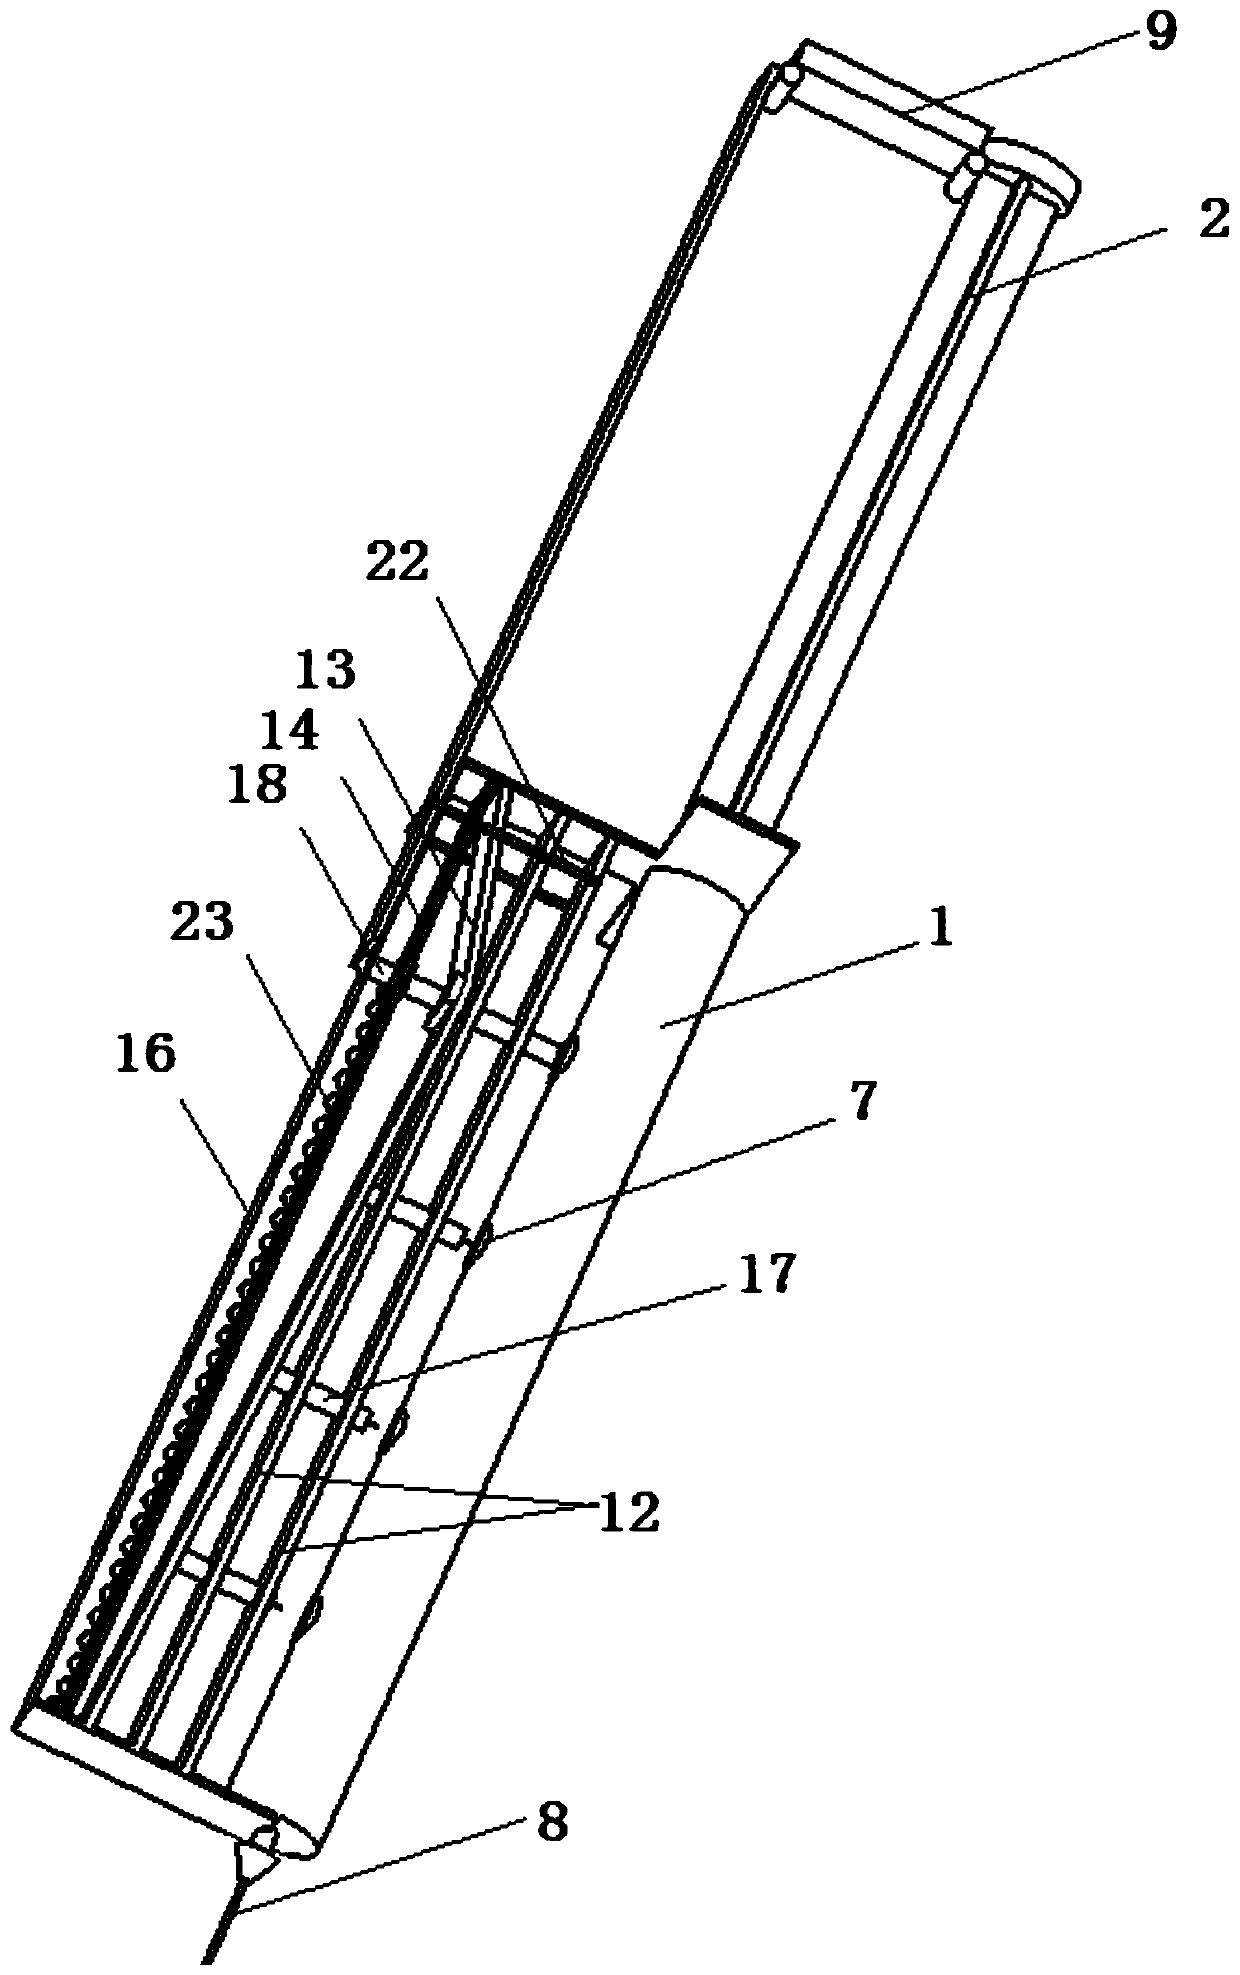 Disposable syringe for continuous repeated quantitative injection